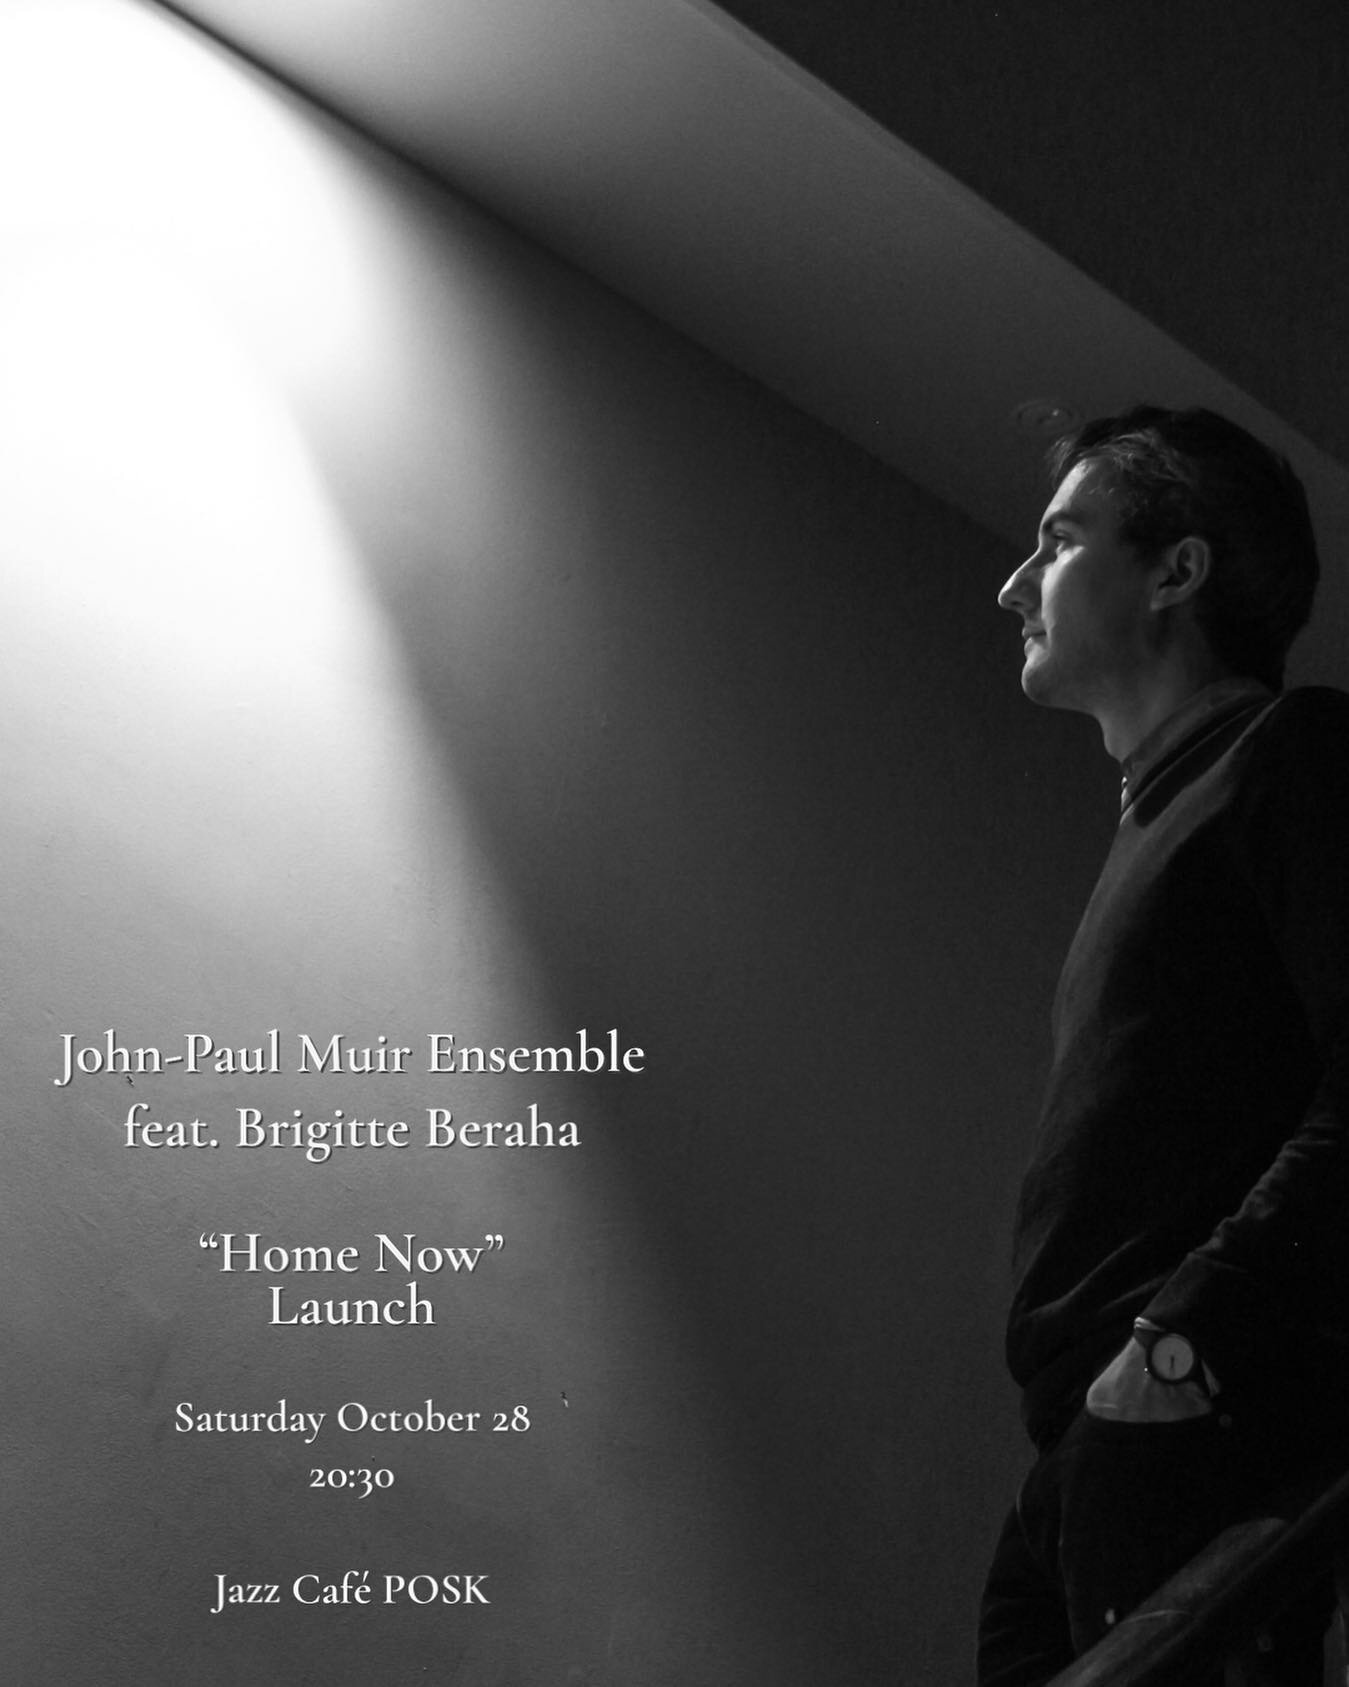 I&rsquo;m overjoyed to announce that I&rsquo;m launching a new album of originals entitled &ldquo;Home Now&rdquo; on Sat Oct 28 at @jazzcafeposk! 

This project features compositions written over the past 3-4 years, several in collaboration with writ